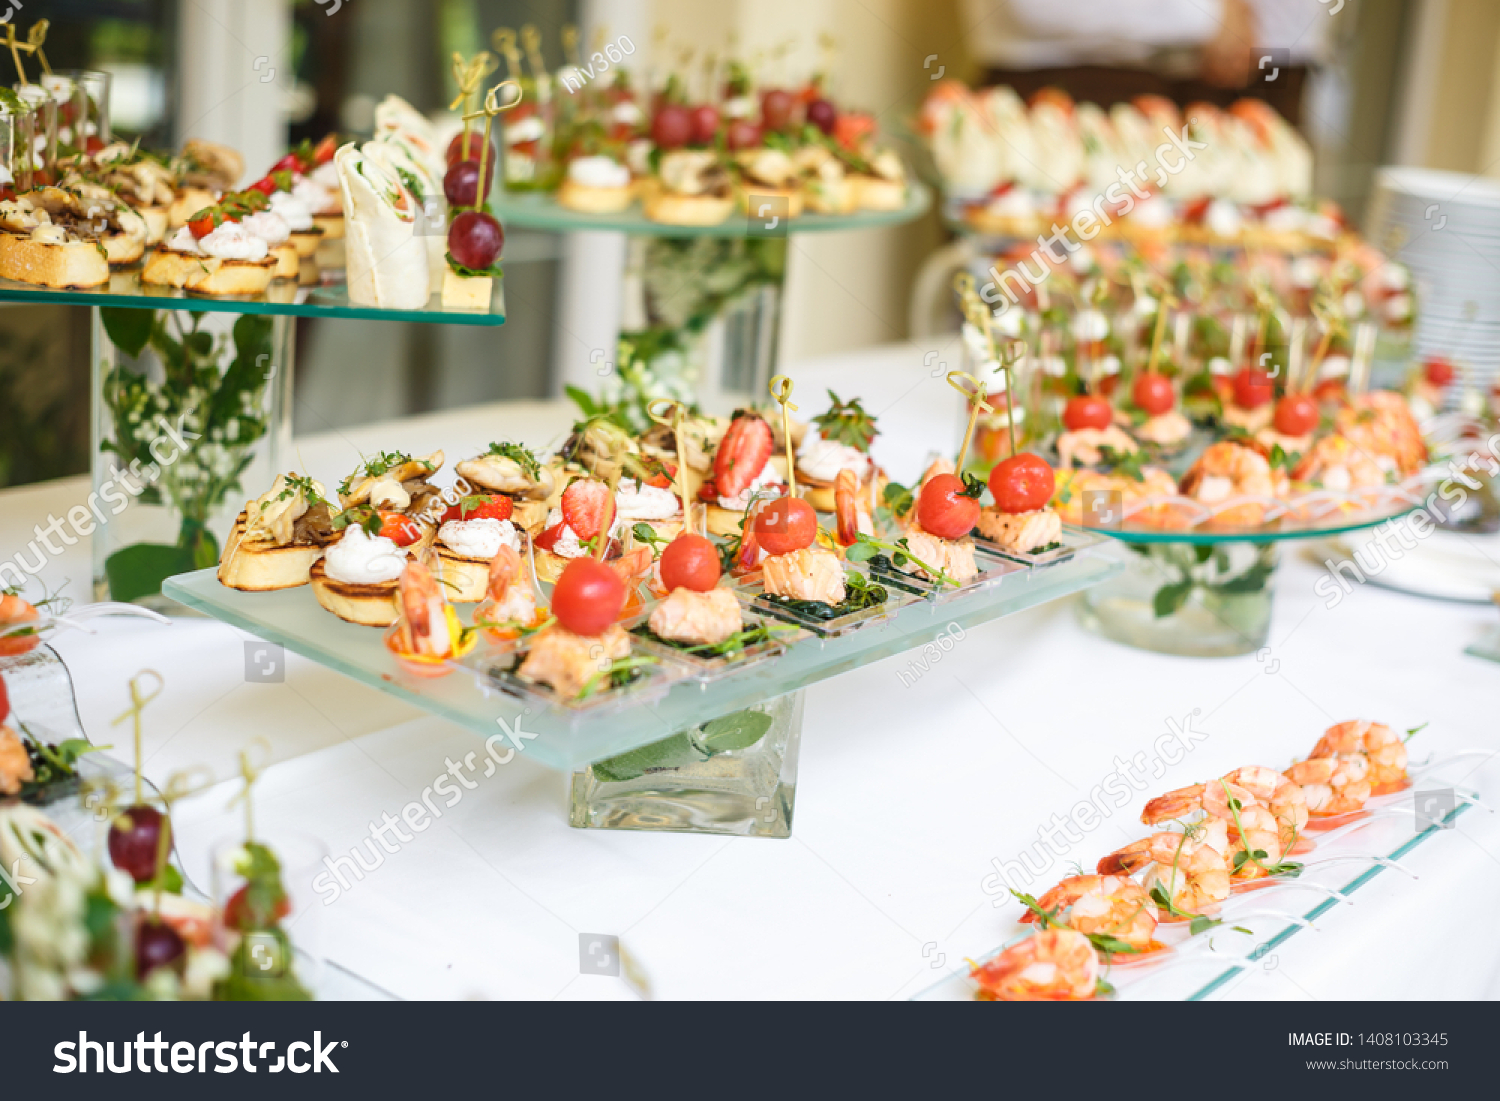 Catering. Off-site food. Buffet table with various canapes, sandwiches, hamburgers and snacks.  #1408103345